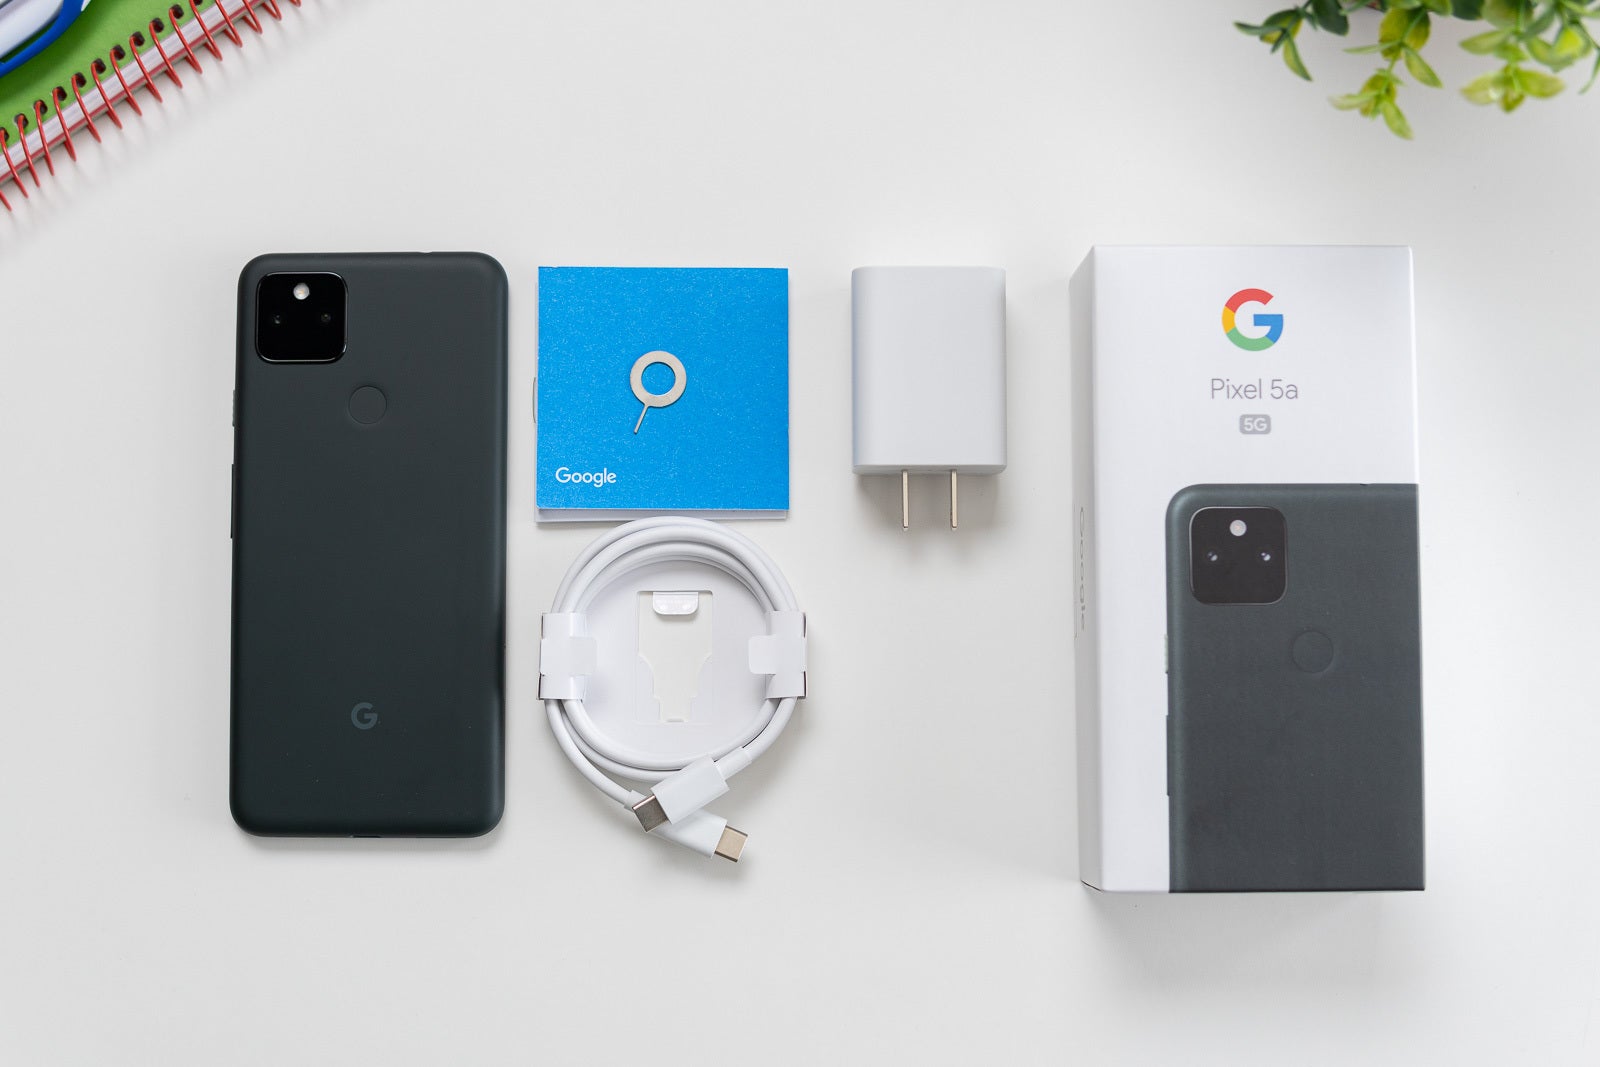 You'll find a charger and a type C cable in the box. You also get a type C to standard USB adapter, and a SIM tool (but there is no case included) - Google Pixel 5a Review: Boring looks hide an outstanding budget phone